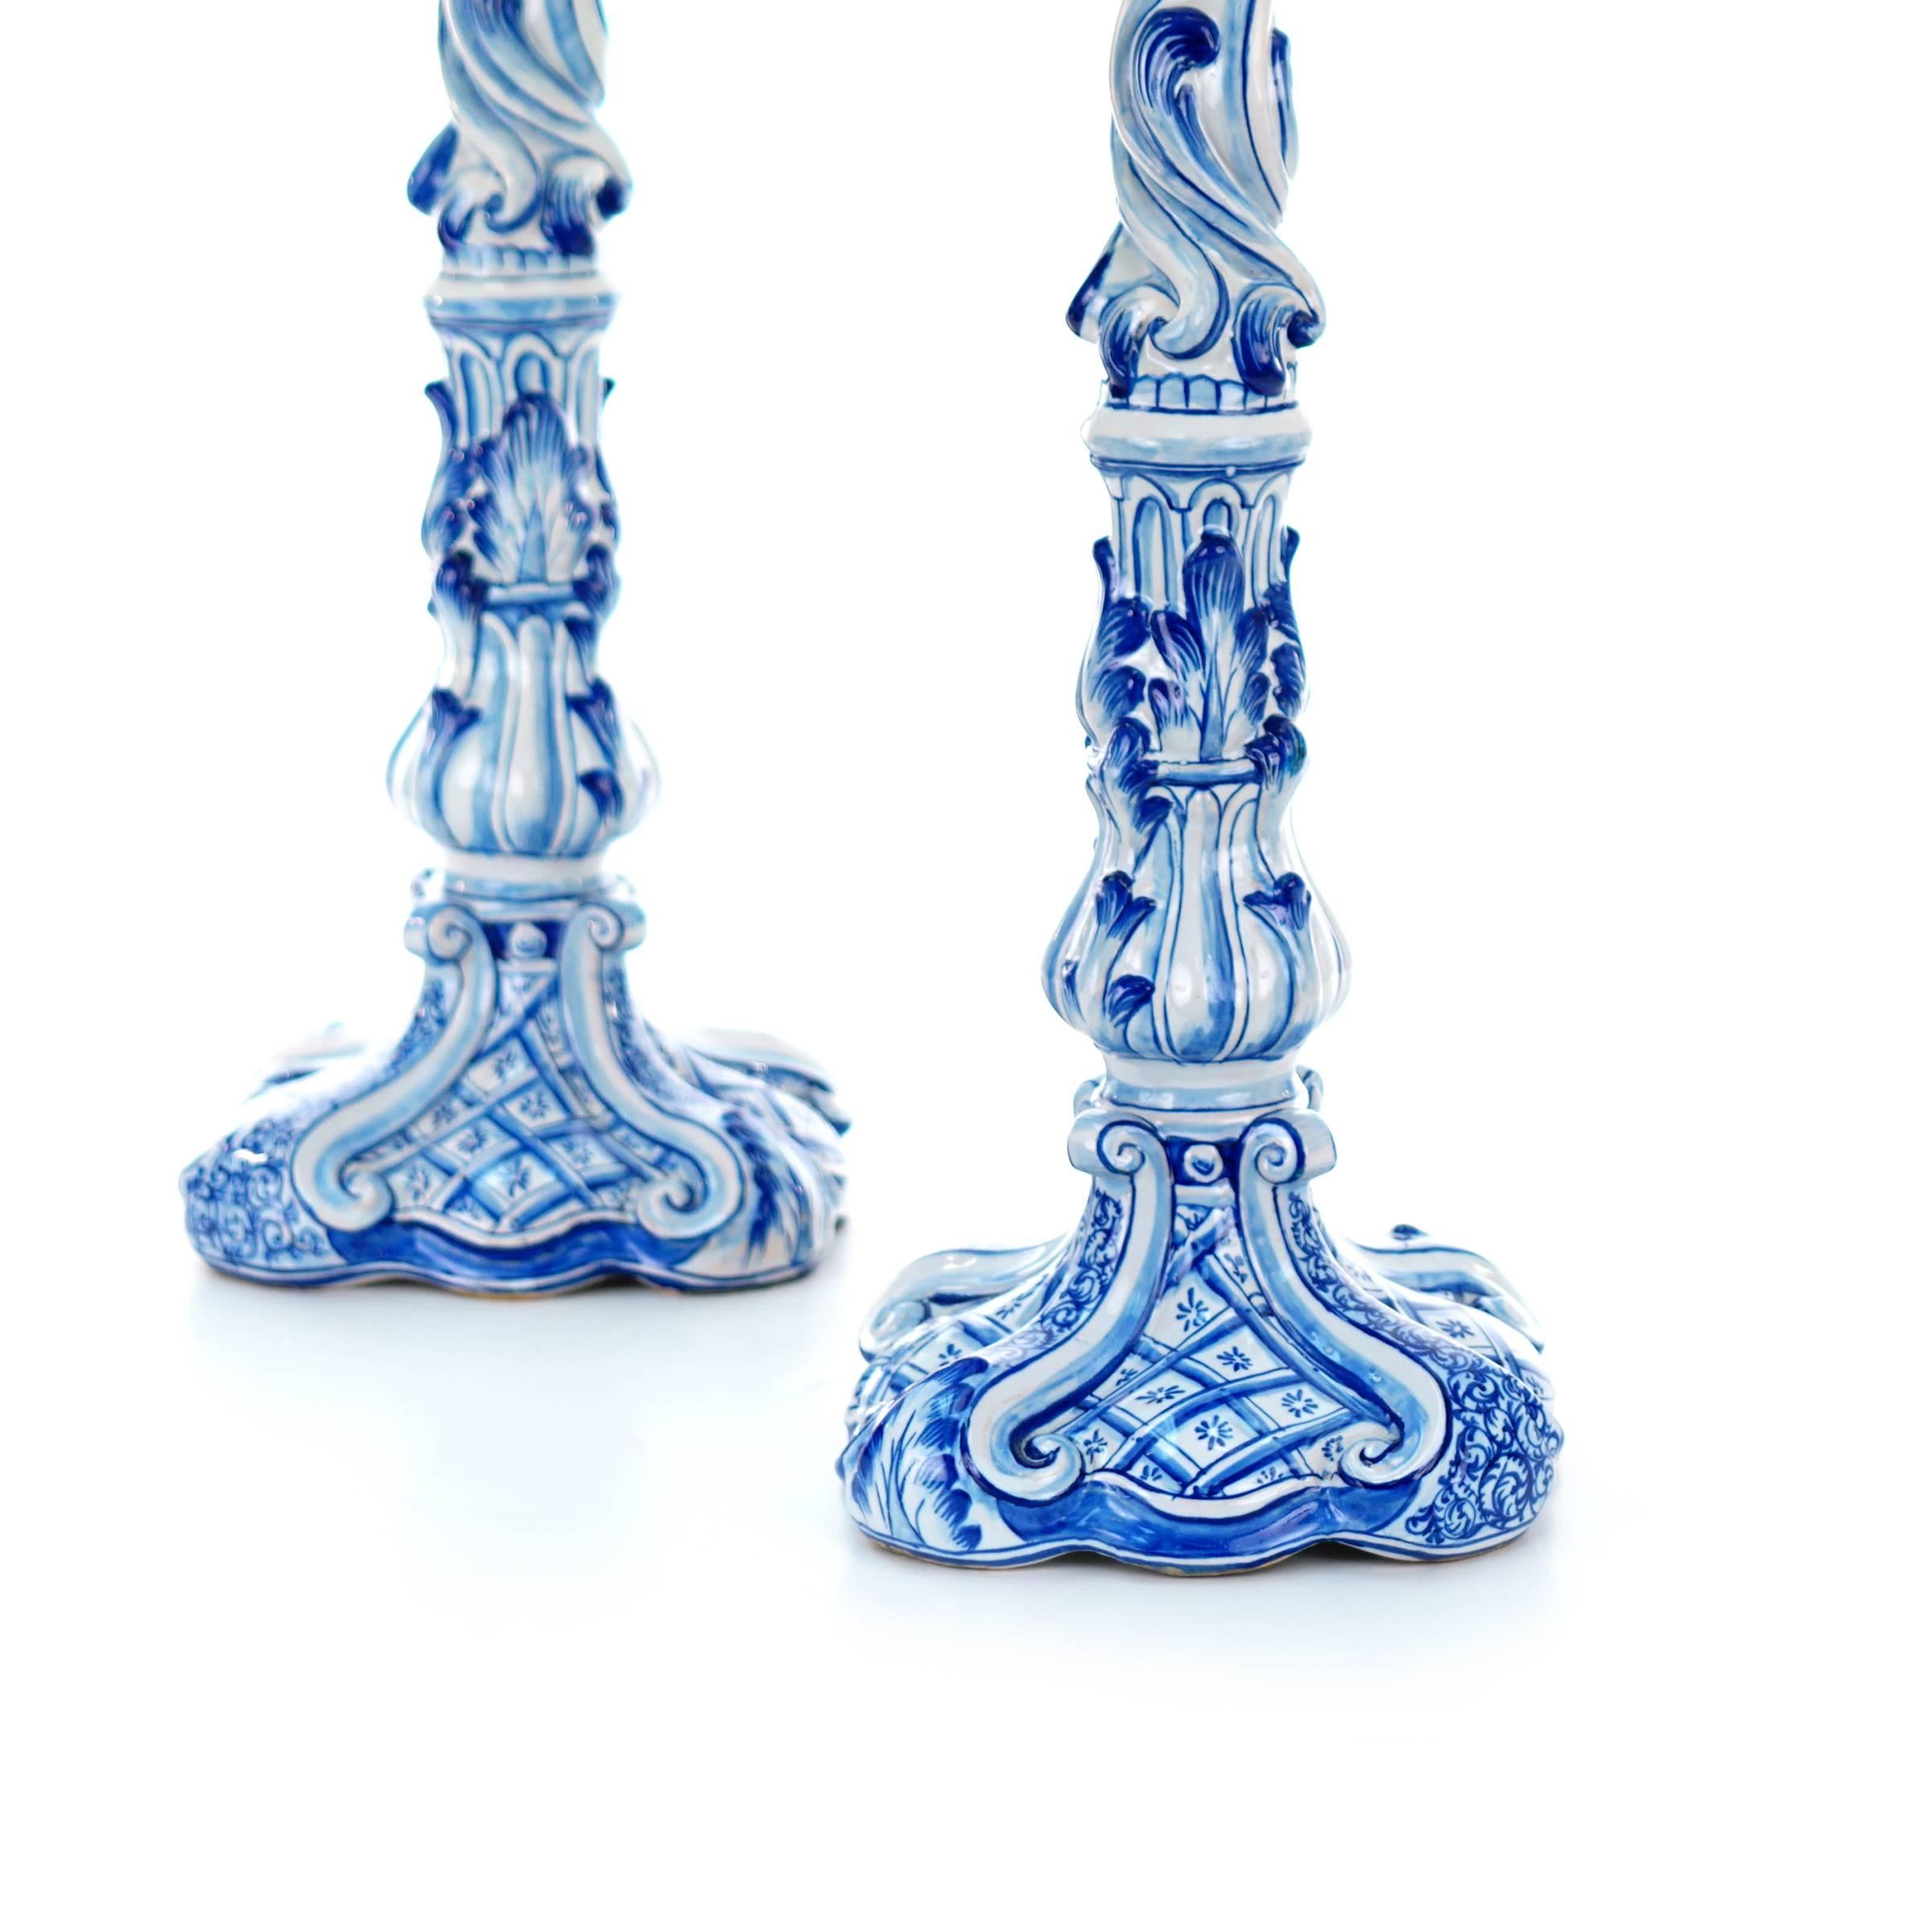 Spectacular 28 inch Tall Pair of Blue Faience Candlesticks c1913 France 2